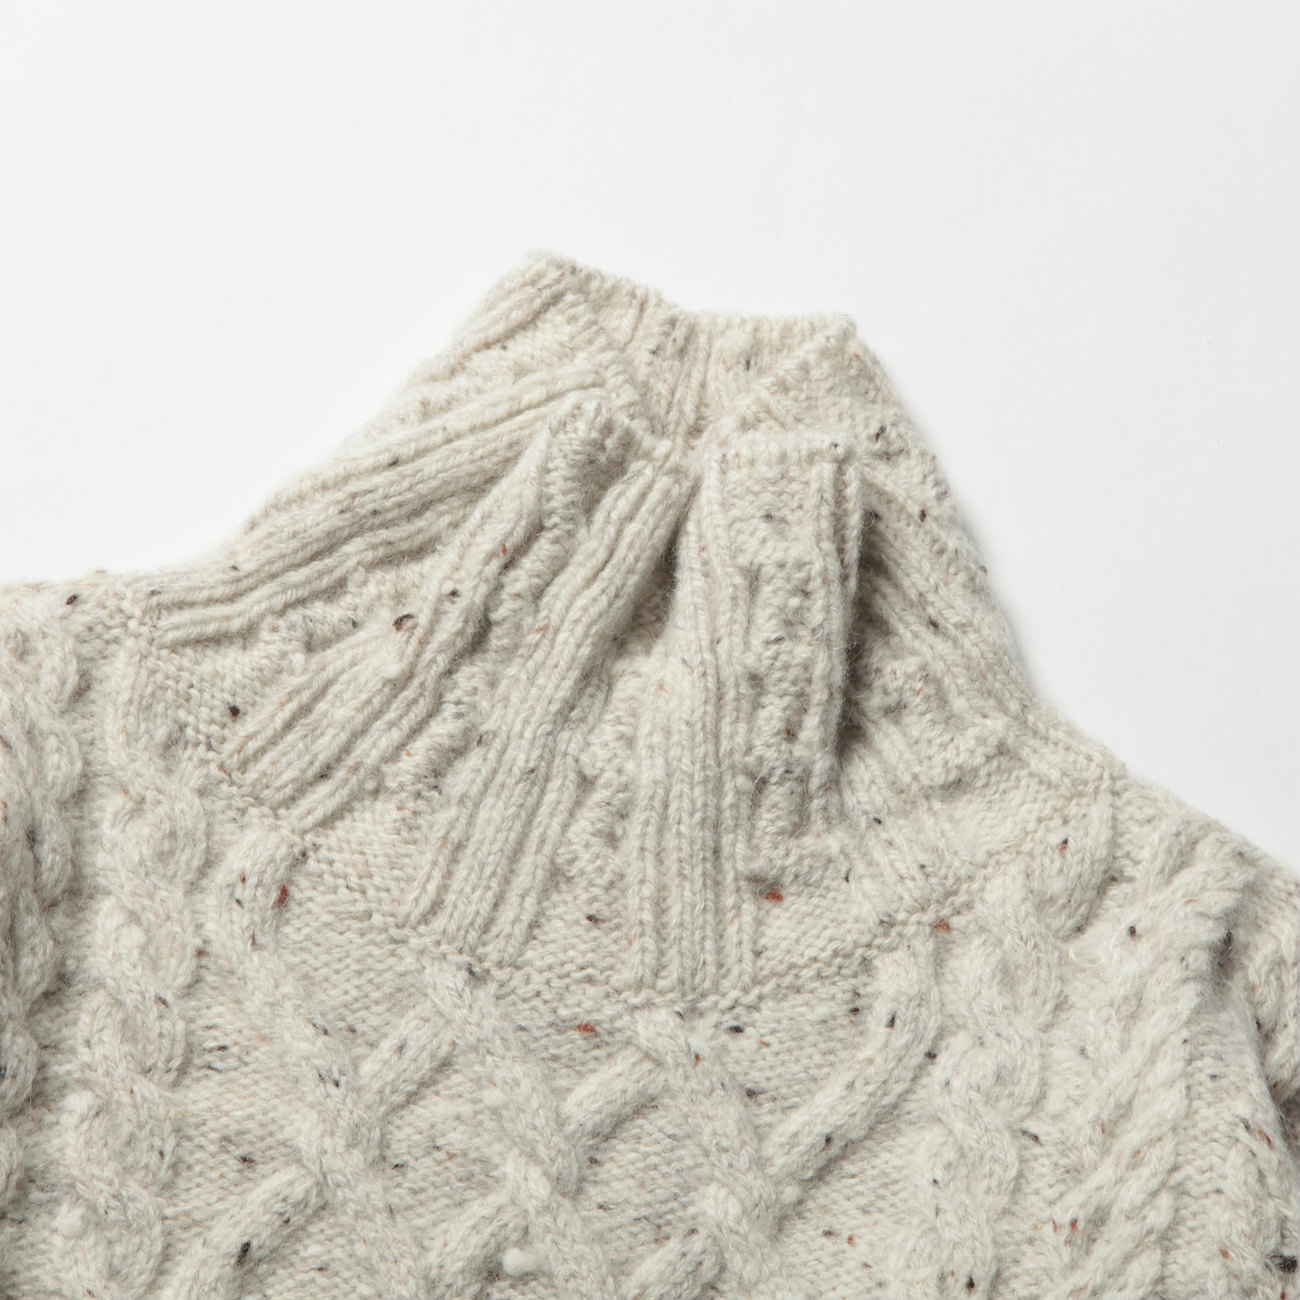 WOOL BABY ALPACA NEPPED CABLE KNIT TURTLE NECK P/O (レディース) - Mix Ivory